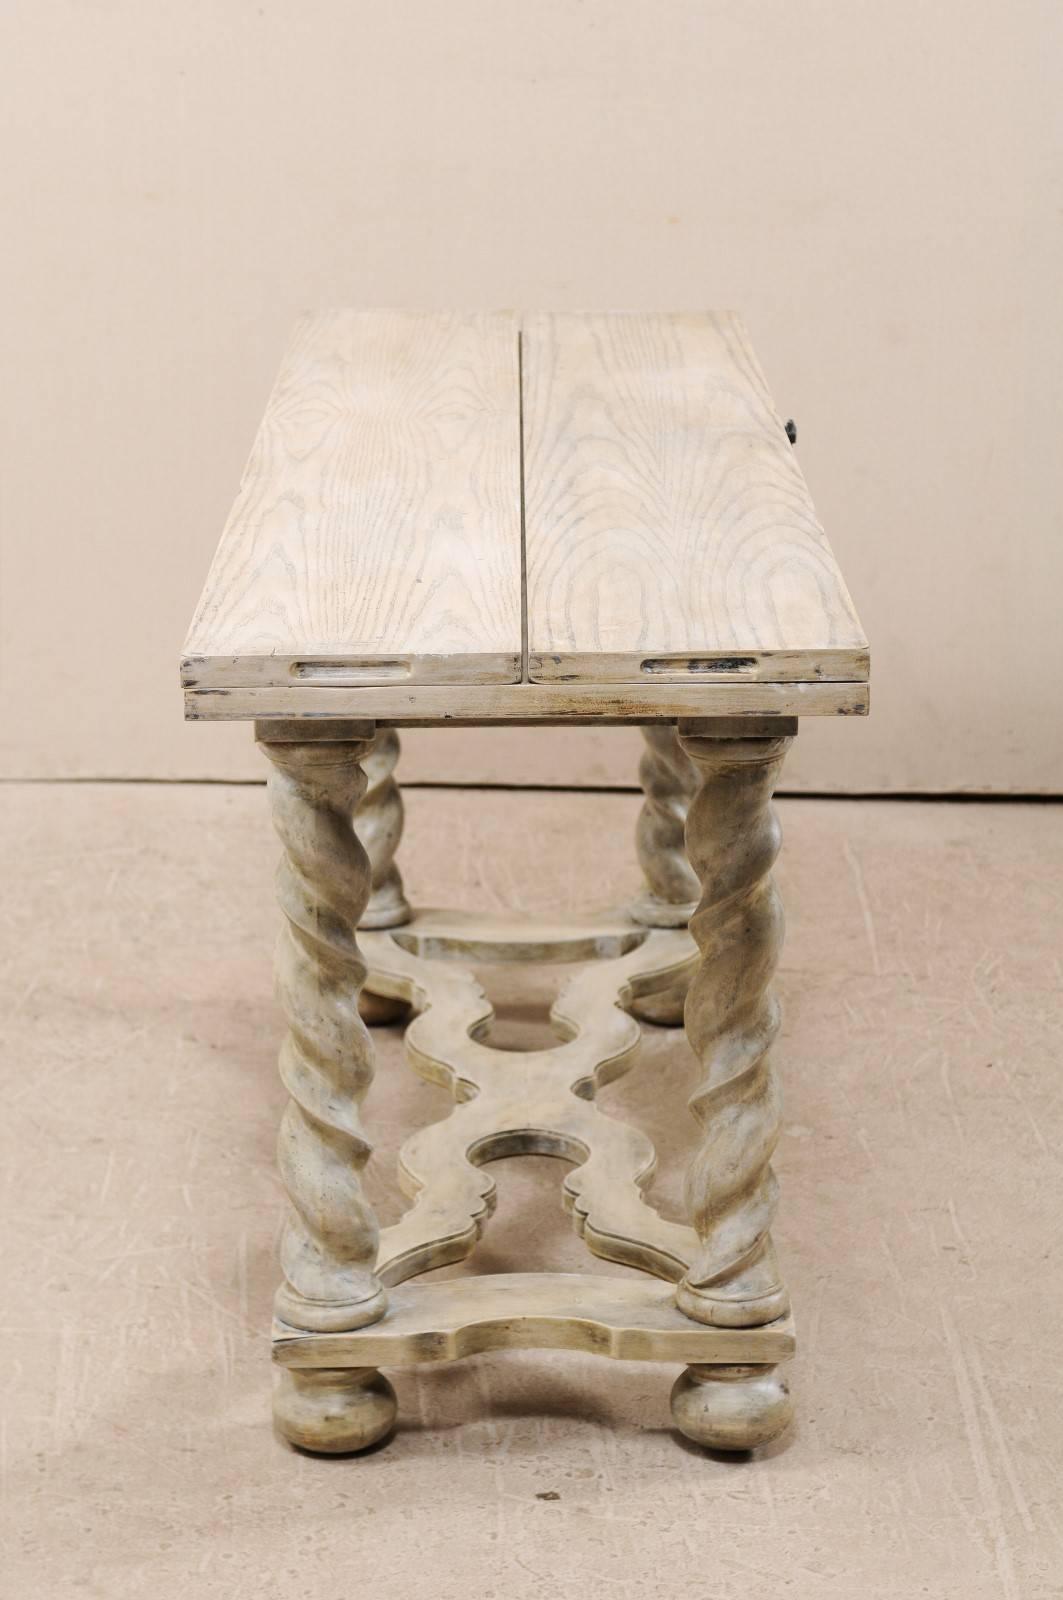 Carved Vintage Convertible Painted Wood Console Table in Light Wash with Twist Legs